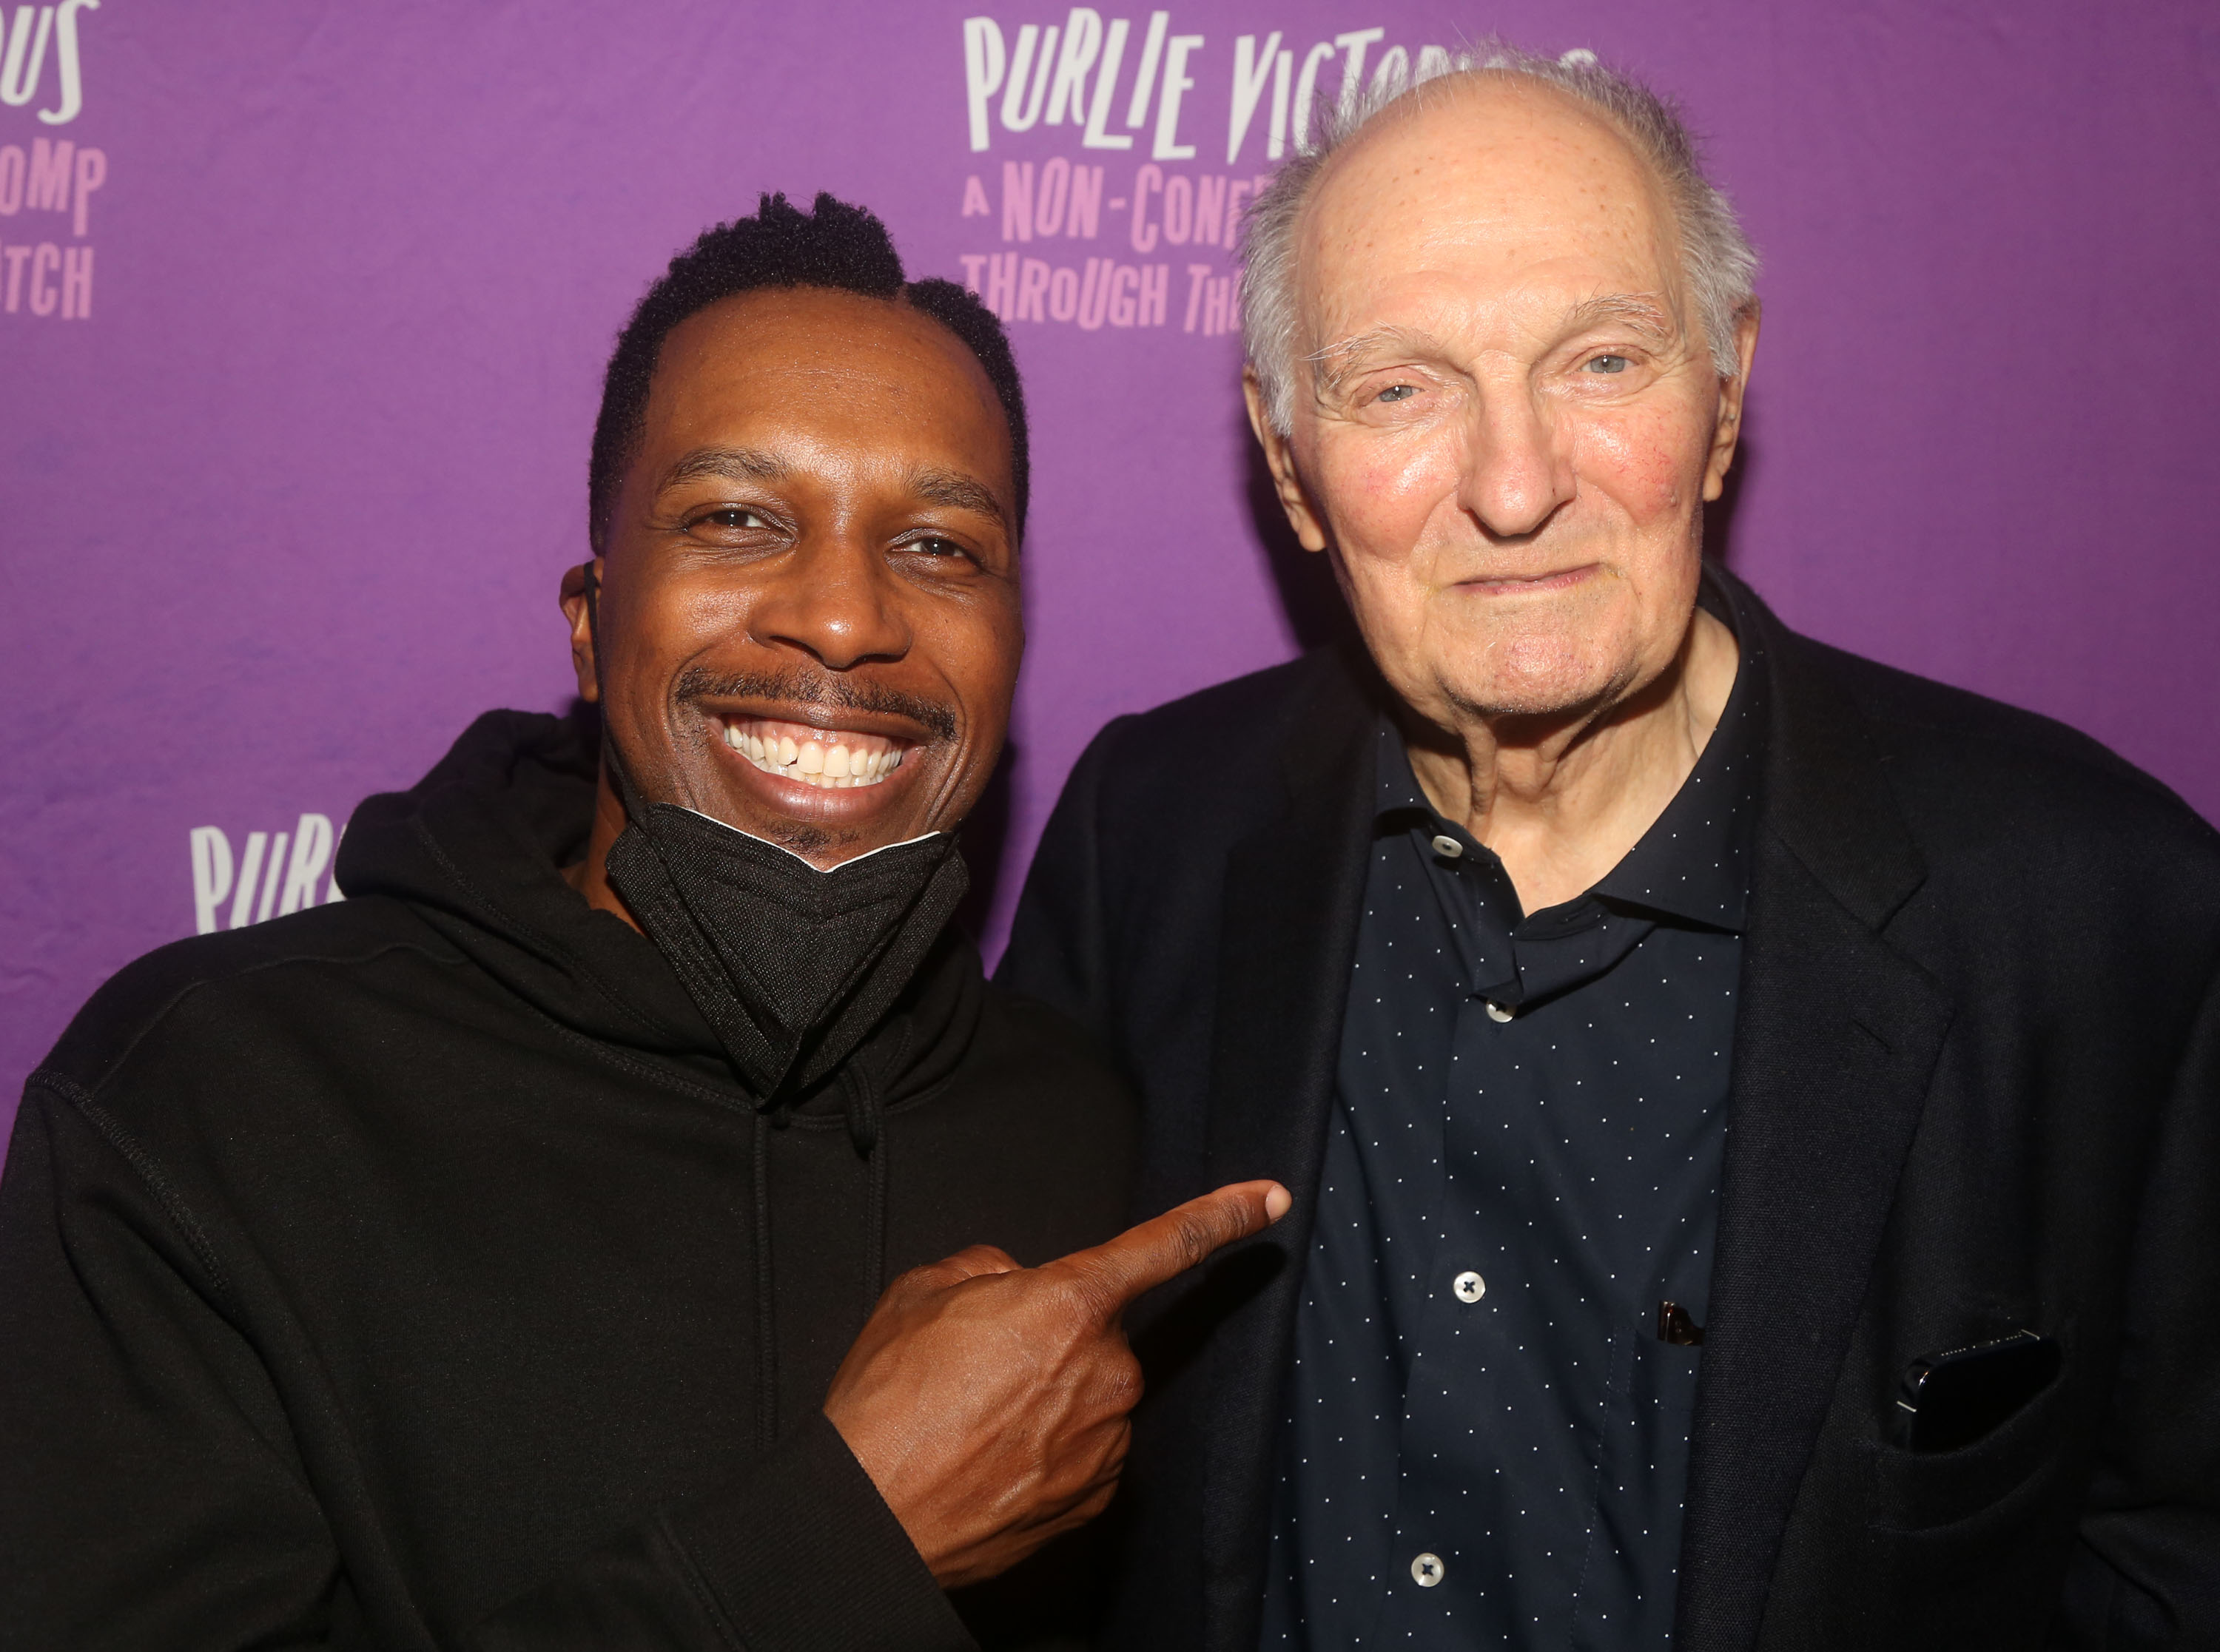 Leslie Odom Jr. and Alan Alda pose backstage at the play "Purlie Victorious" on Broadway, at The Music Box Theater, on October 3, 2023 in New York City.  | Source: Getty Images